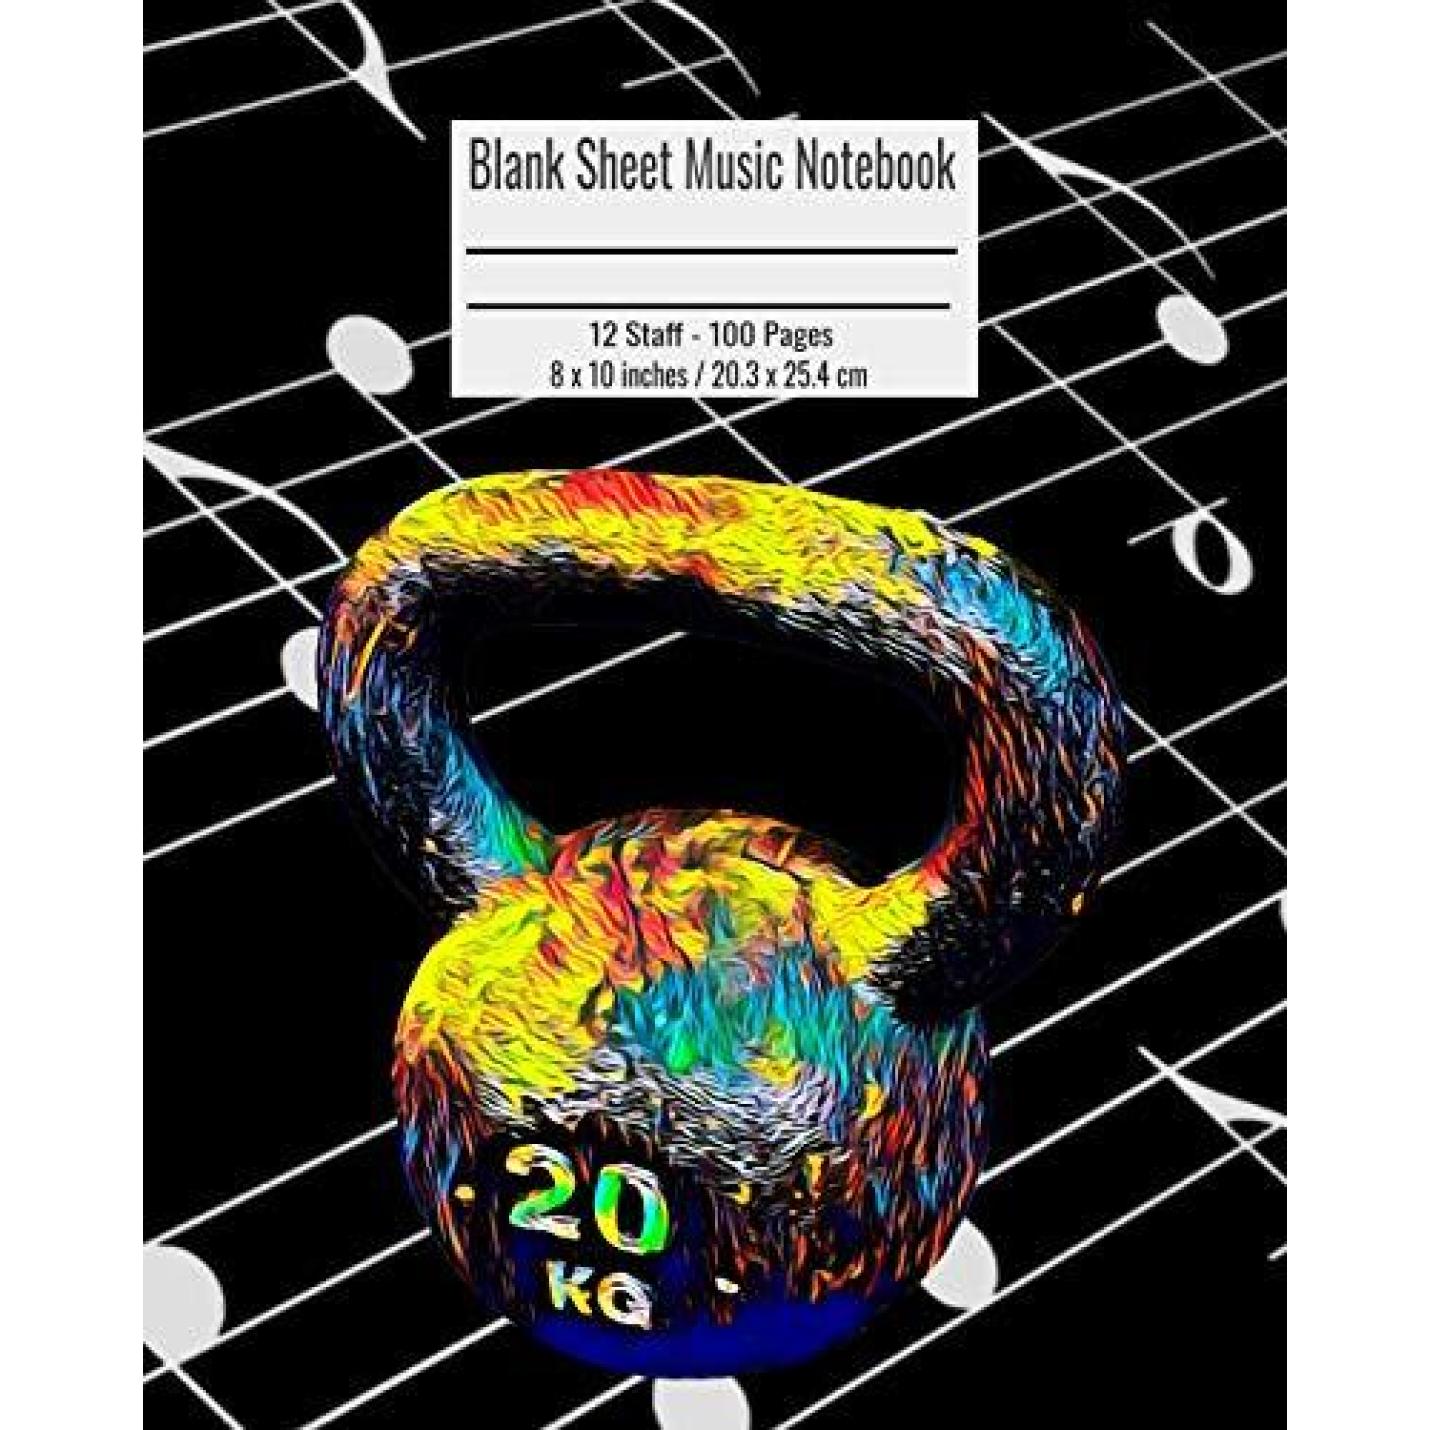 Blank Sheet Music Notebook: 100 Pages 12 Staff Music Manuscript Paper Colorful Kettlebell Gym Cover 8 X 10 Inches  20.3 X 25.4 CM Paperback